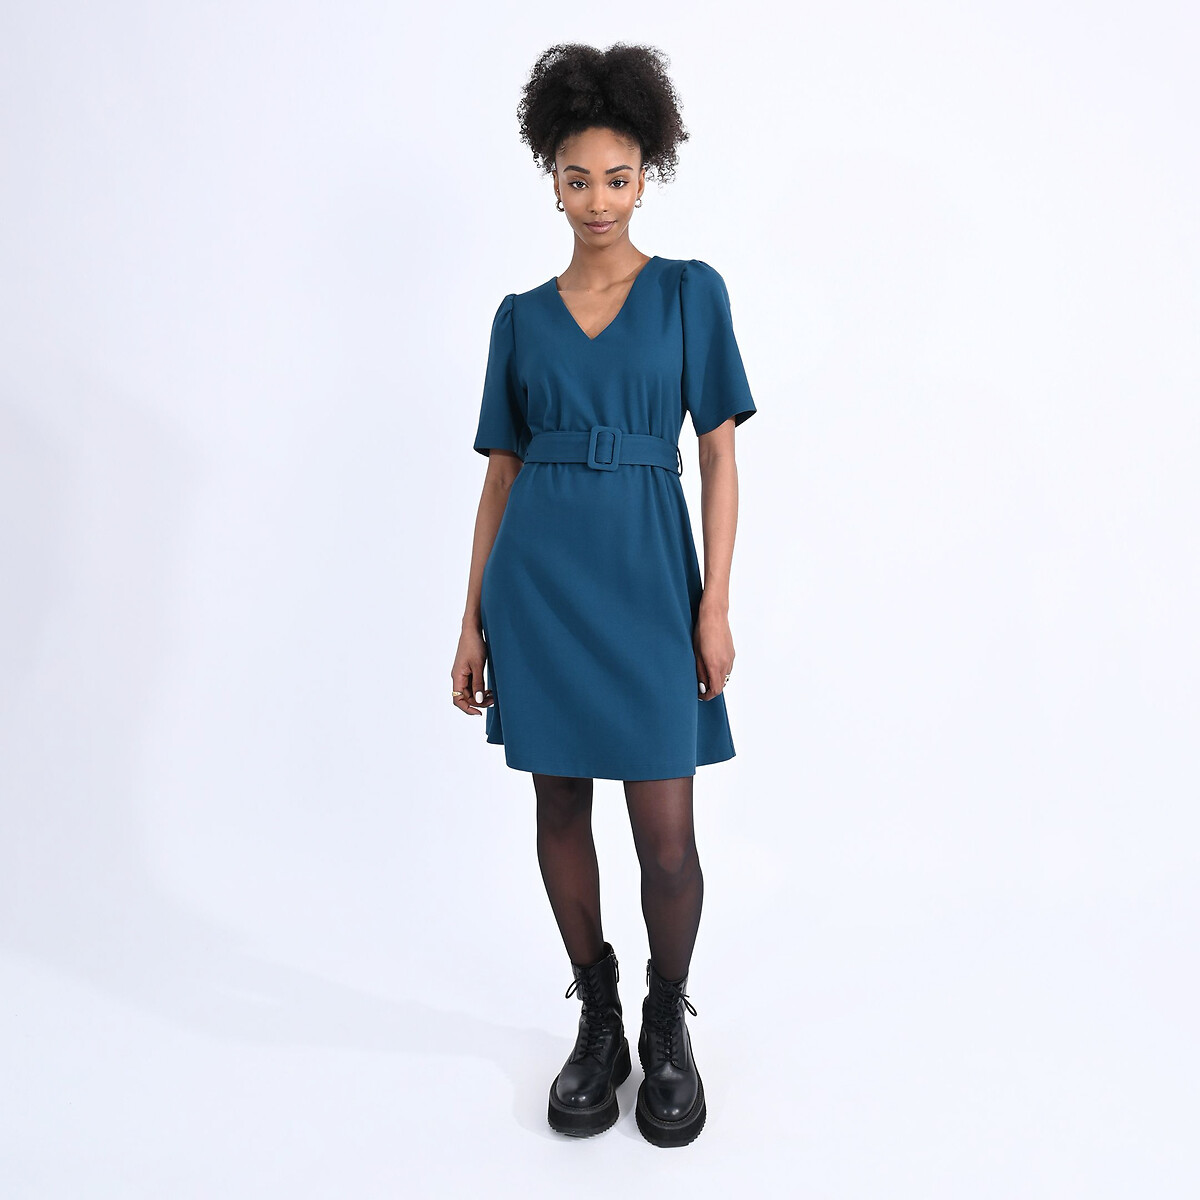 Mini Skater Dress with Short Puff Sleeves